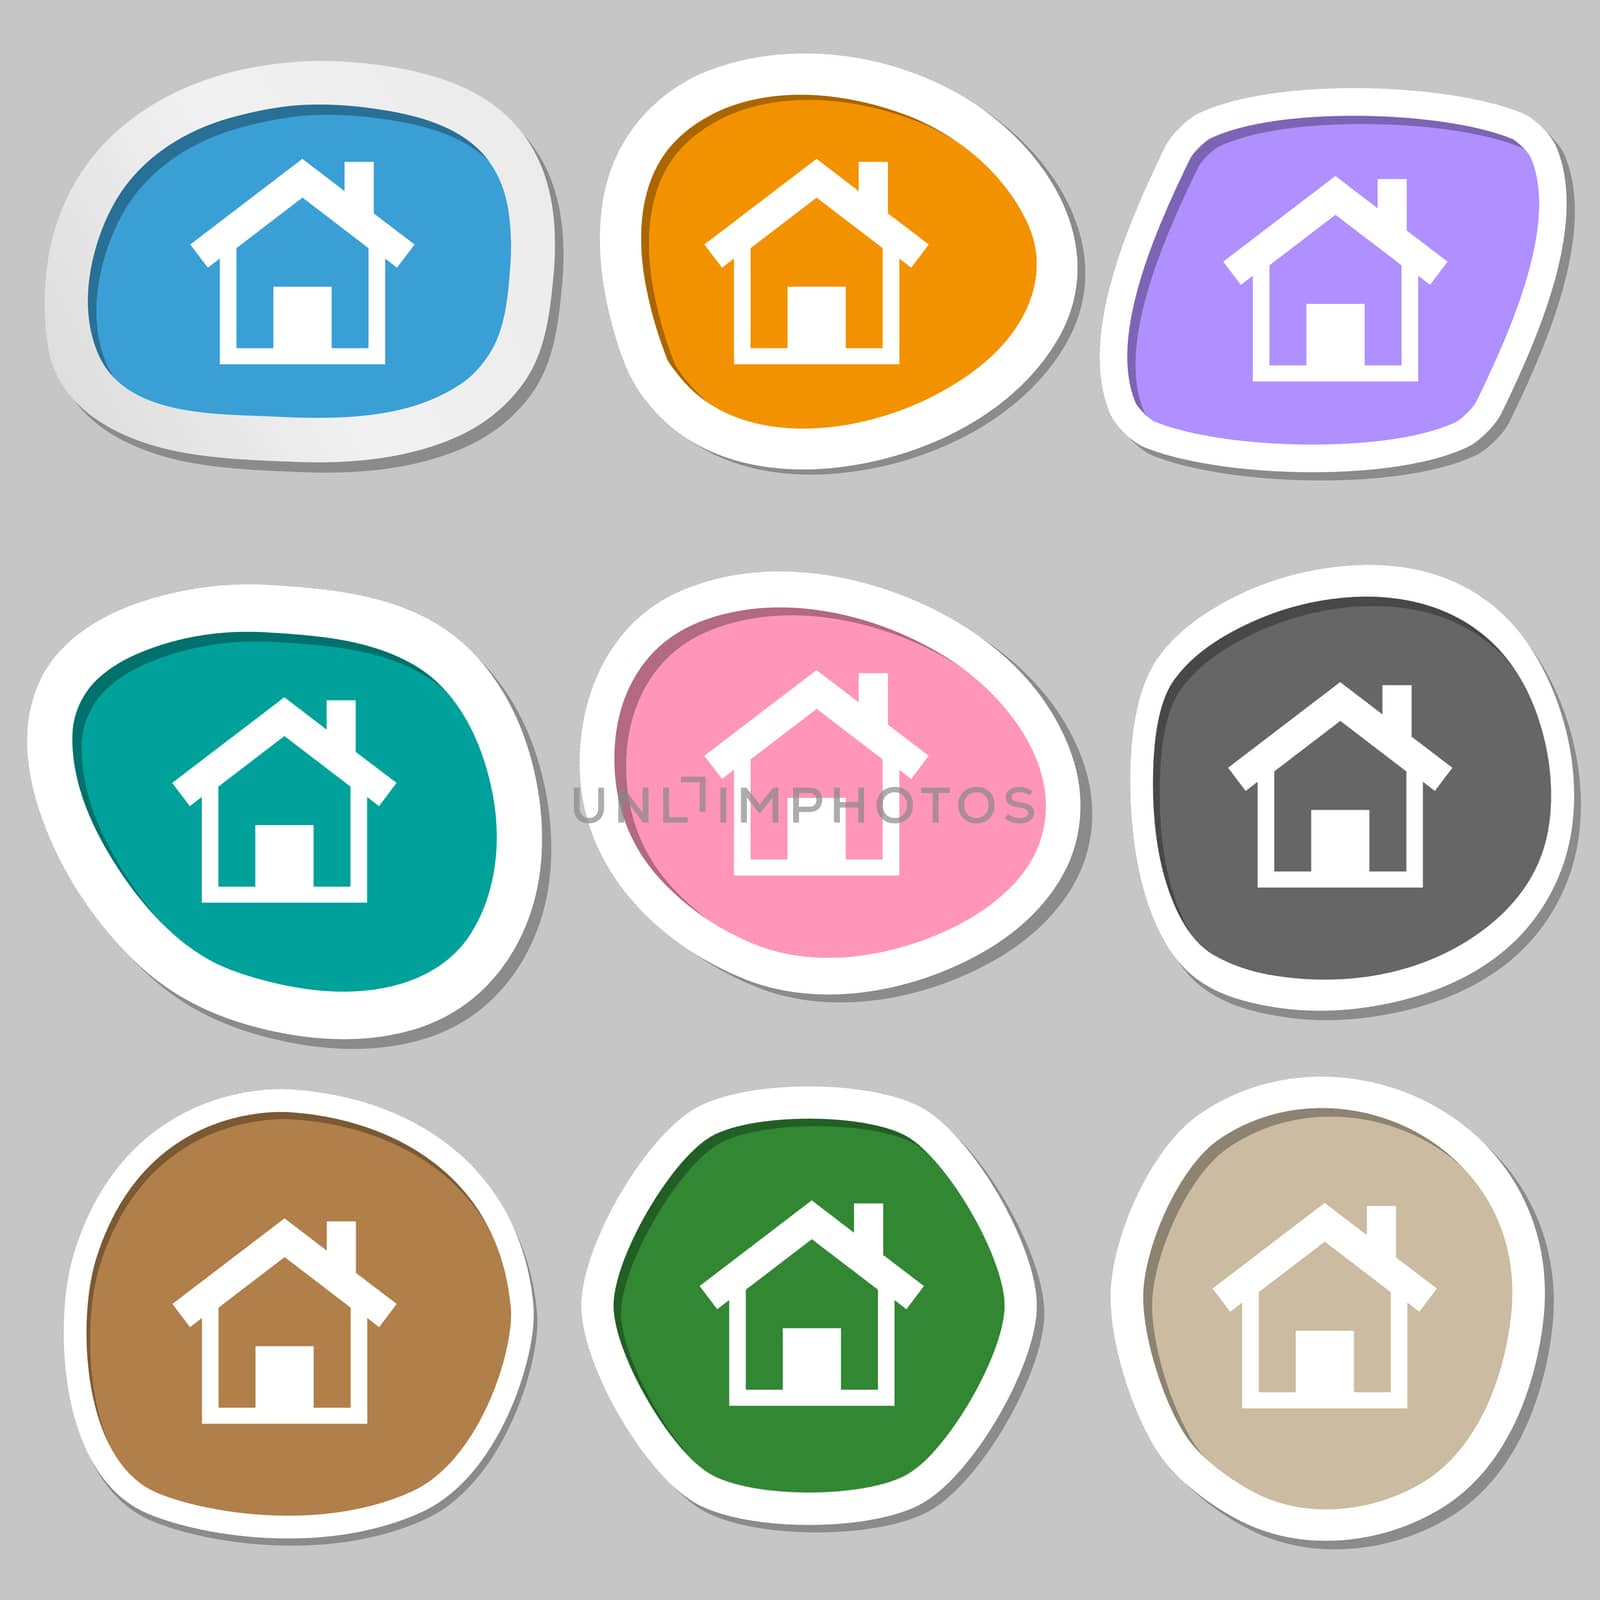 Home sign icon. Main page button. Navigation symbol. Multicolored paper stickers. illustration